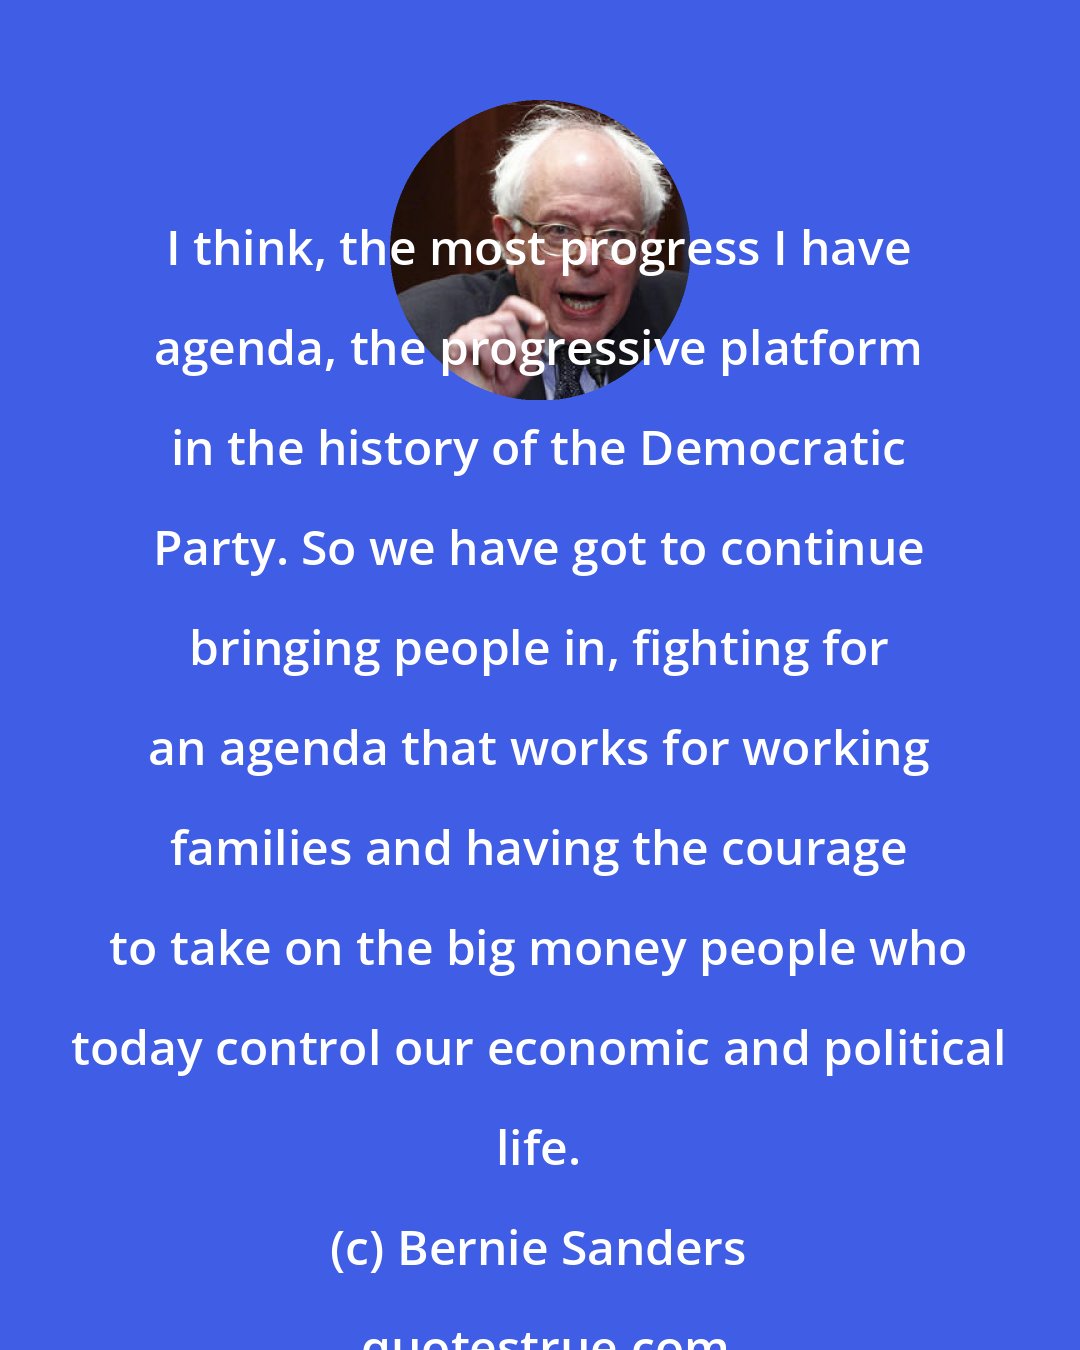 Bernie Sanders: I think, the most progress I have agenda, the progressive platform in the history of the Democratic Party. So we have got to continue bringing people in, fighting for an agenda that works for working families and having the courage to take on the big money people who today control our economic and political life.